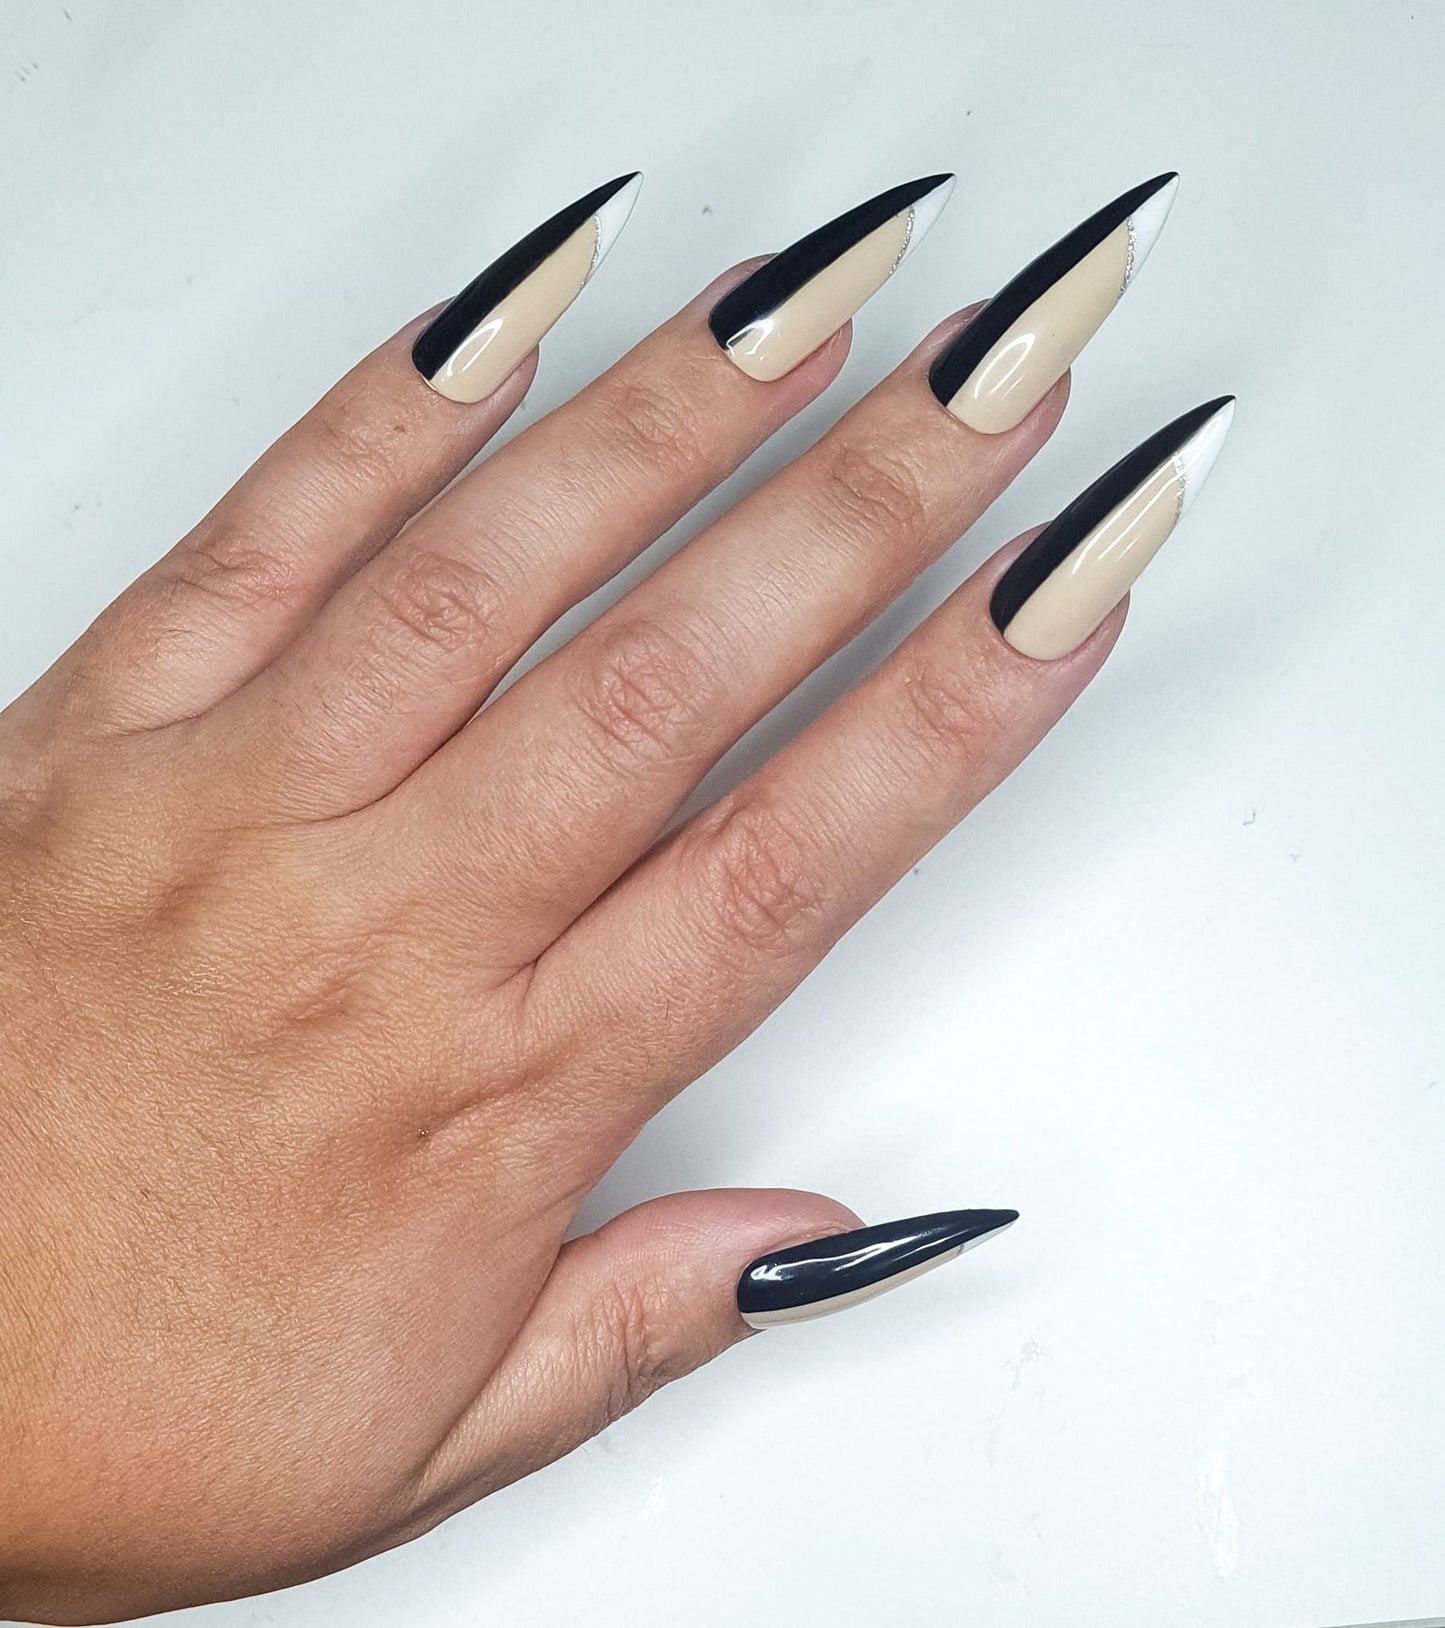 CoCo Press On Nails- Stiletto Shaped Black and white Classic half and half detail spring summer collection sexy classy full cover gel tip luxury false nails salon quality hand painted custom made uk